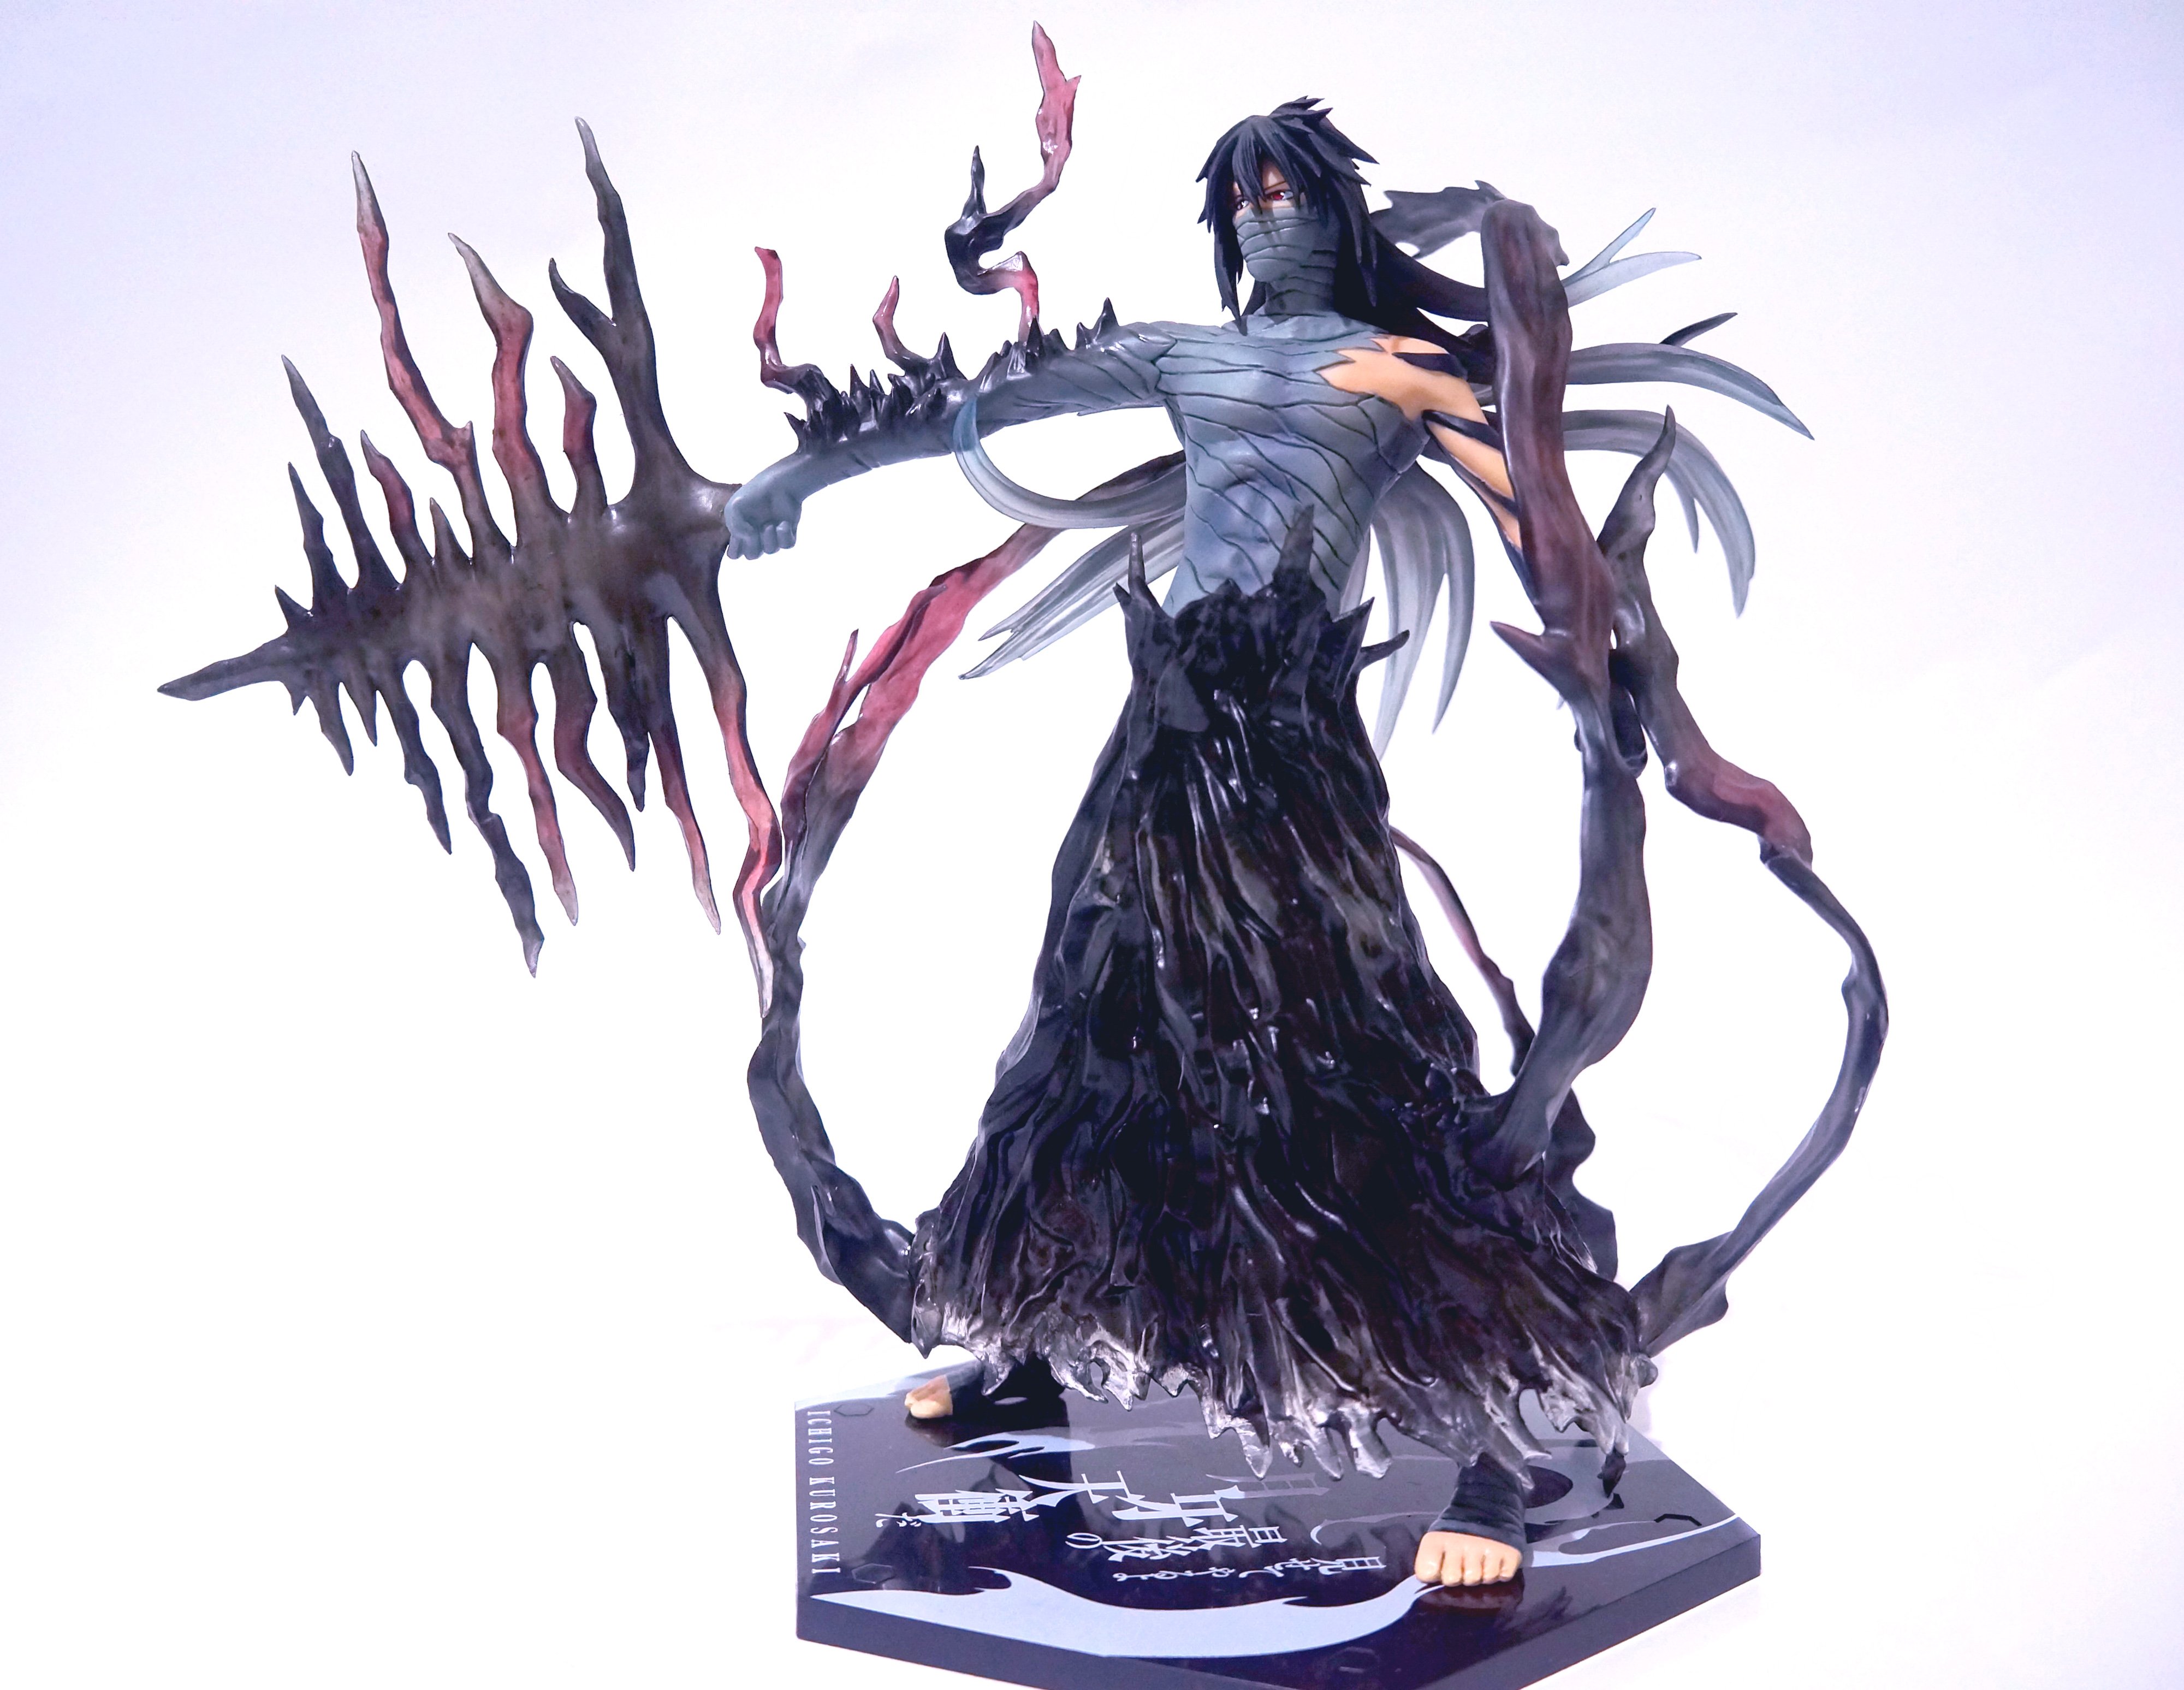 Anime Heroes  Bleach  Renji Abarai Action Figure  Toys and Statues   Anime Figs  Statues  The Comic Hunter